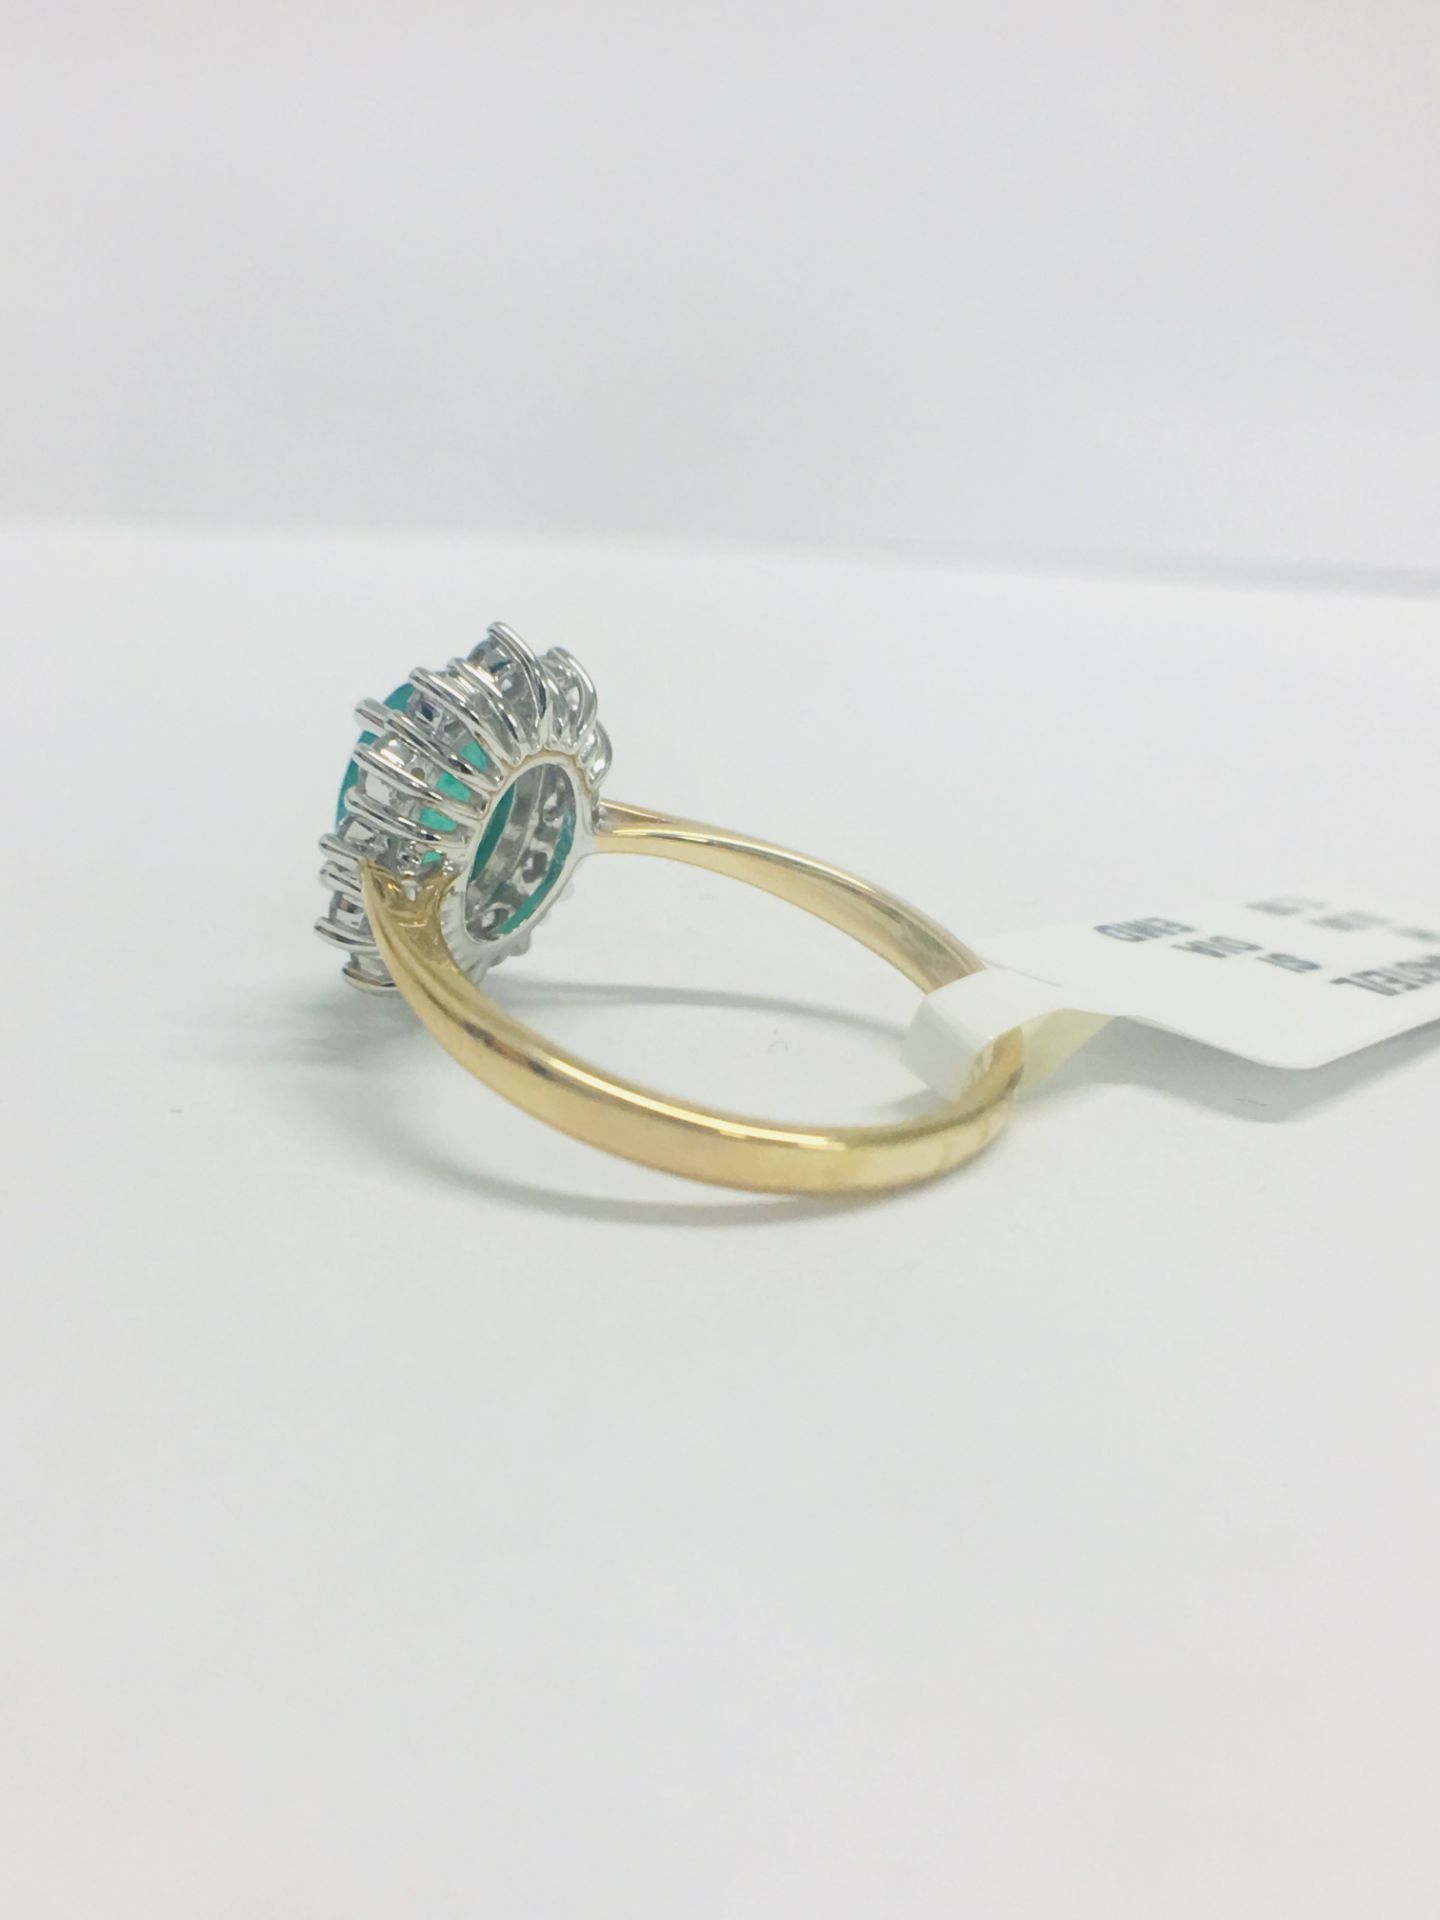 18ct Emerald And Diamond Cluster Ring - Image 4 of 10